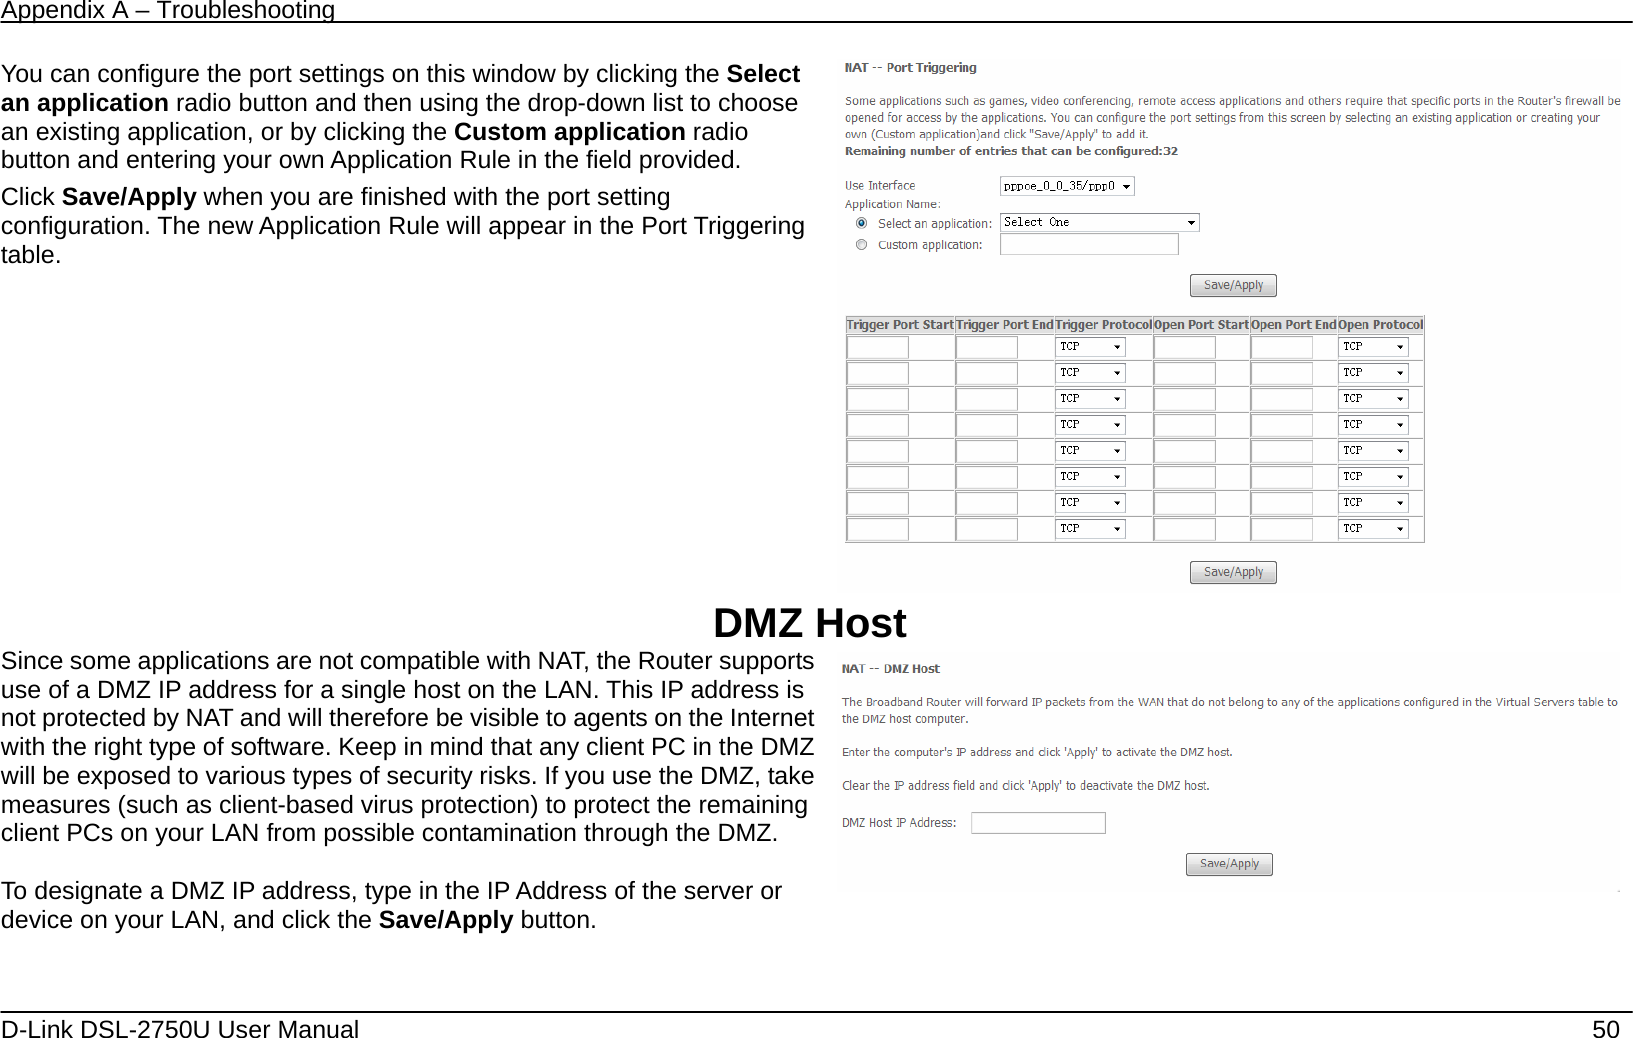 Appendix A – Troubleshooting   D-Link DSL-2750U User Manual    50 You can configure the port settings on this window by clicking the Select an application radio button and then using the drop-down list to choose an existing application, or by clicking the Custom application radio button and entering your own Application Rule in the field provided.   Click Save/Apply when you are finished with the port setting configuration. The new Application Rule will appear in the Port Triggering table.   DMZ Host Since some applications are not compatible with NAT, the Router supports use of a DMZ IP address for a single host on the LAN. This IP address is not protected by NAT and will therefore be visible to agents on the Internet with the right type of software. Keep in mind that any client PC in the DMZ will be exposed to various types of security risks. If you use the DMZ, take measures (such as client-based virus protection) to protect the remaining client PCs on your LAN from possible contamination through the DMZ.  To designate a DMZ IP address, type in the IP Address of the server or device on your LAN, and click the Save/Apply button.   